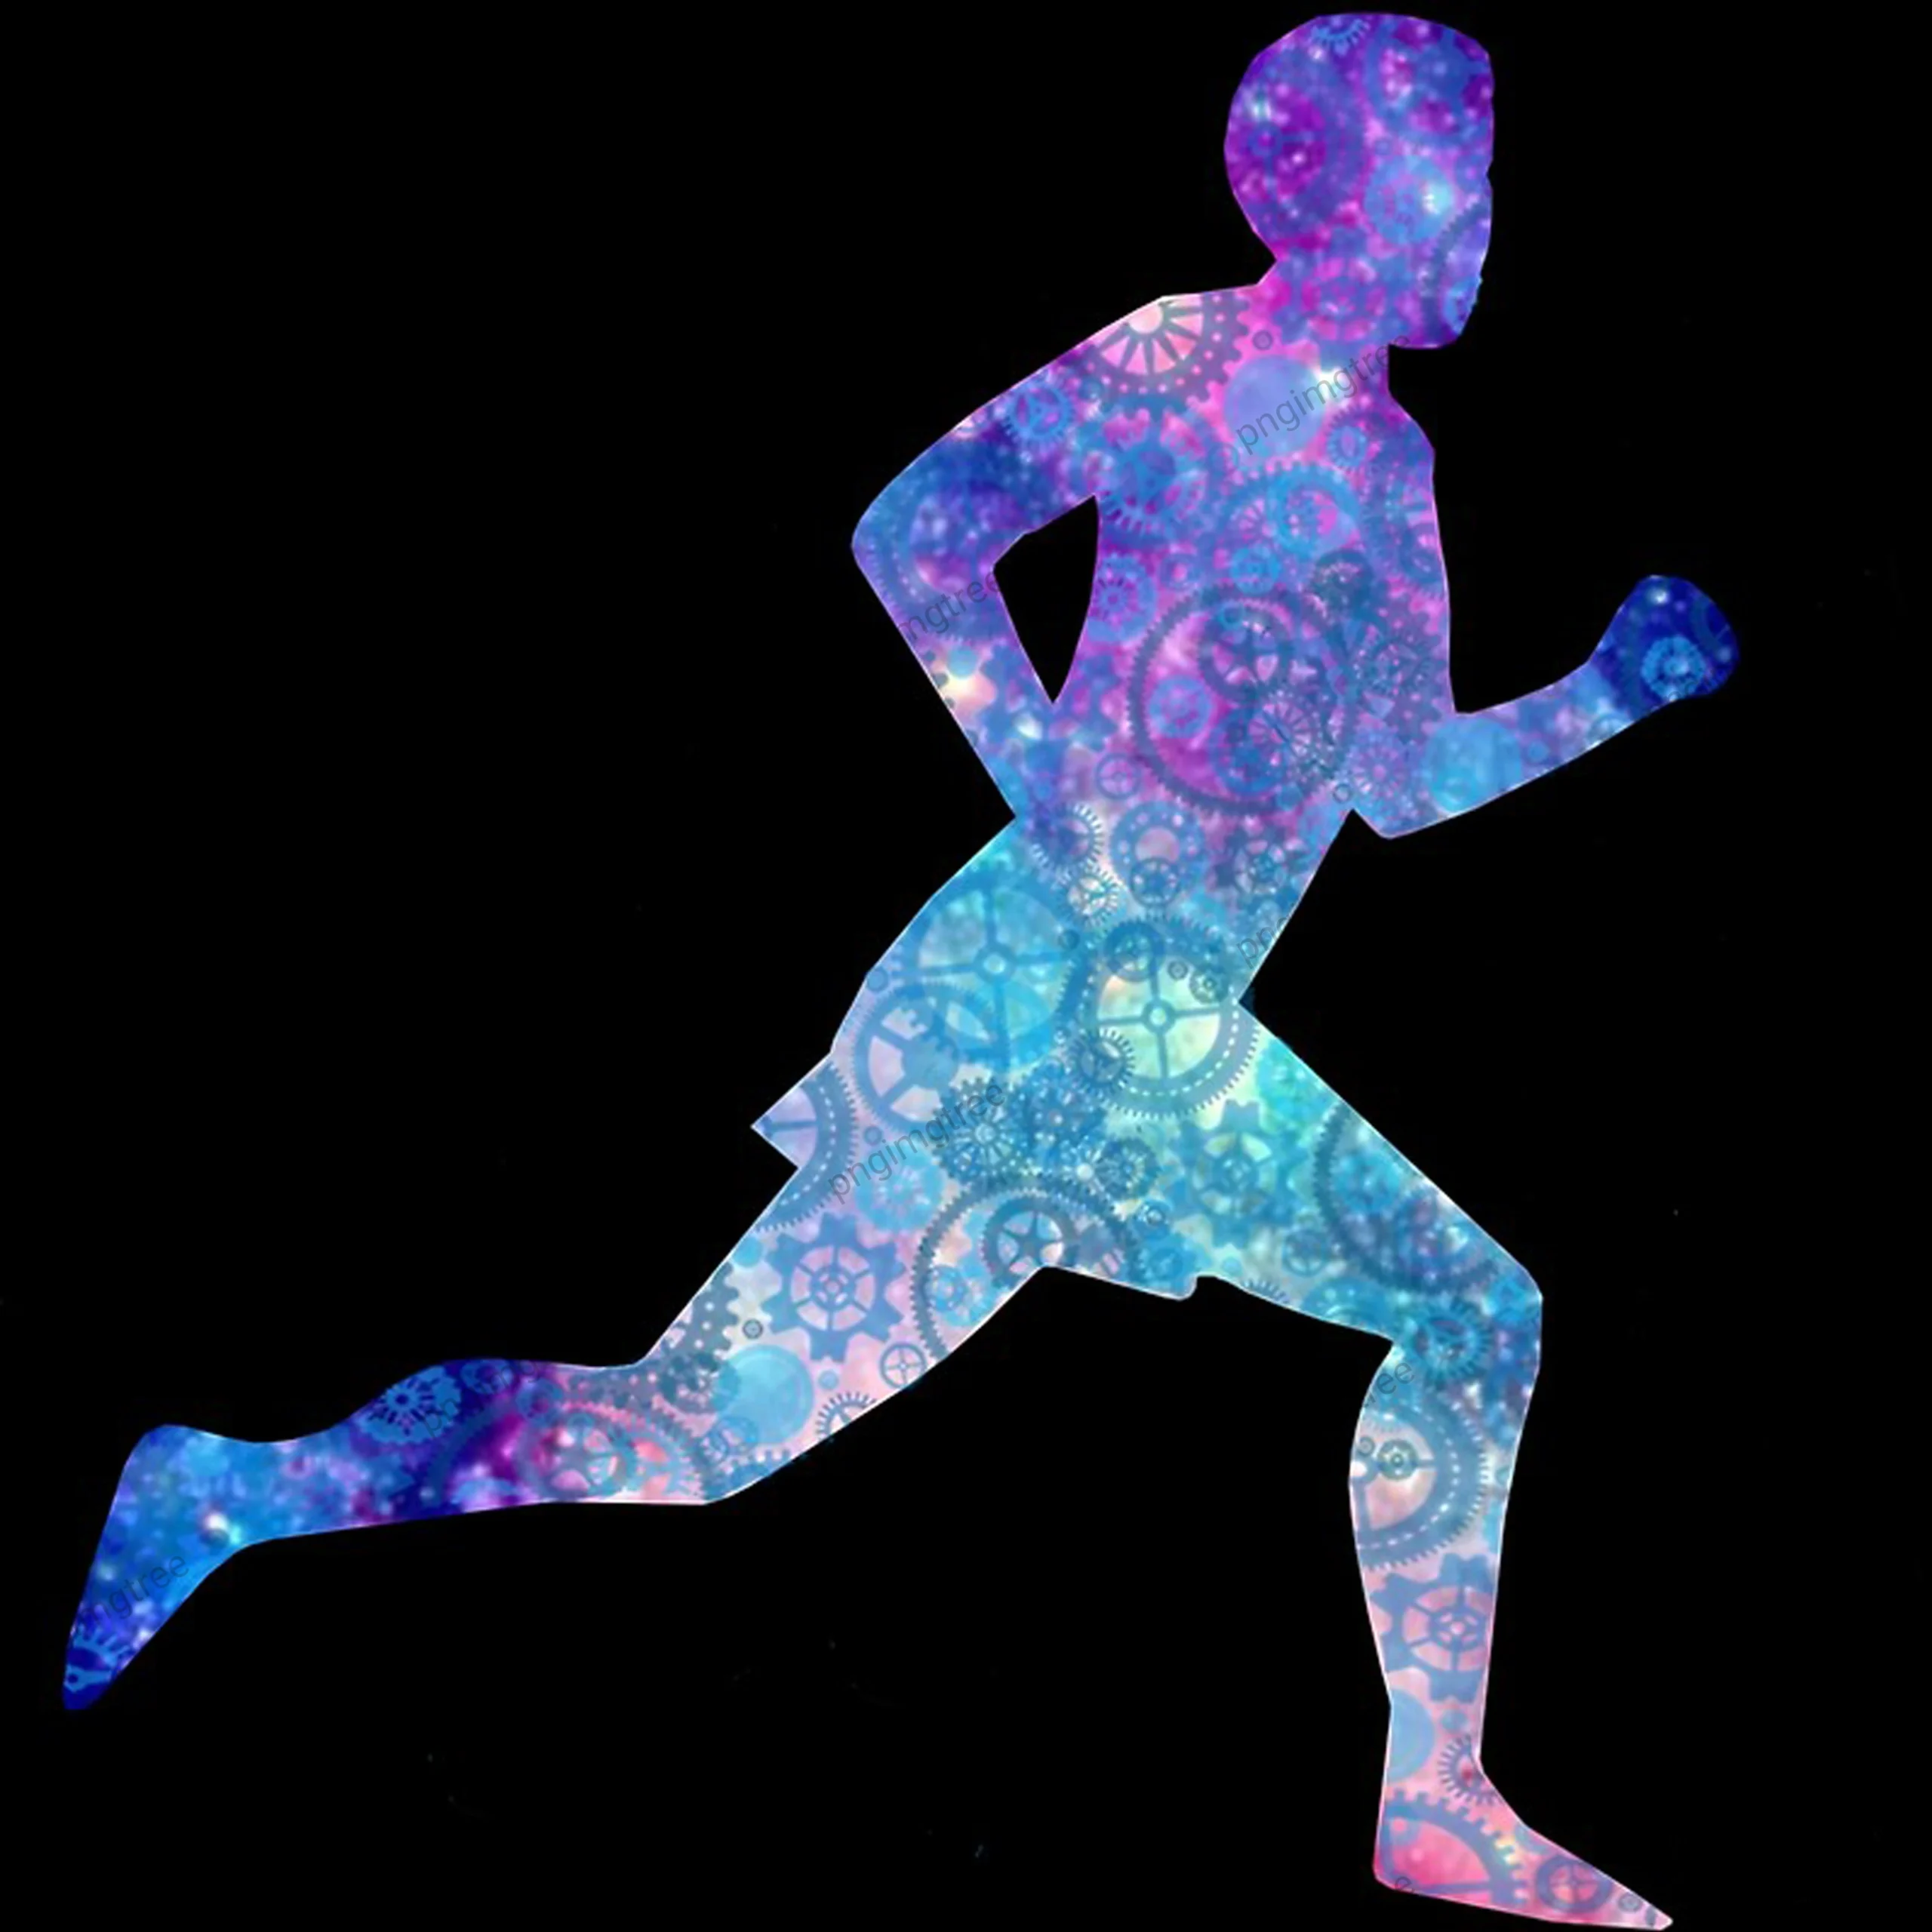 vector image of the man running clothes blue galaxy background and motivational style for exercise, running and racing isolated on black background